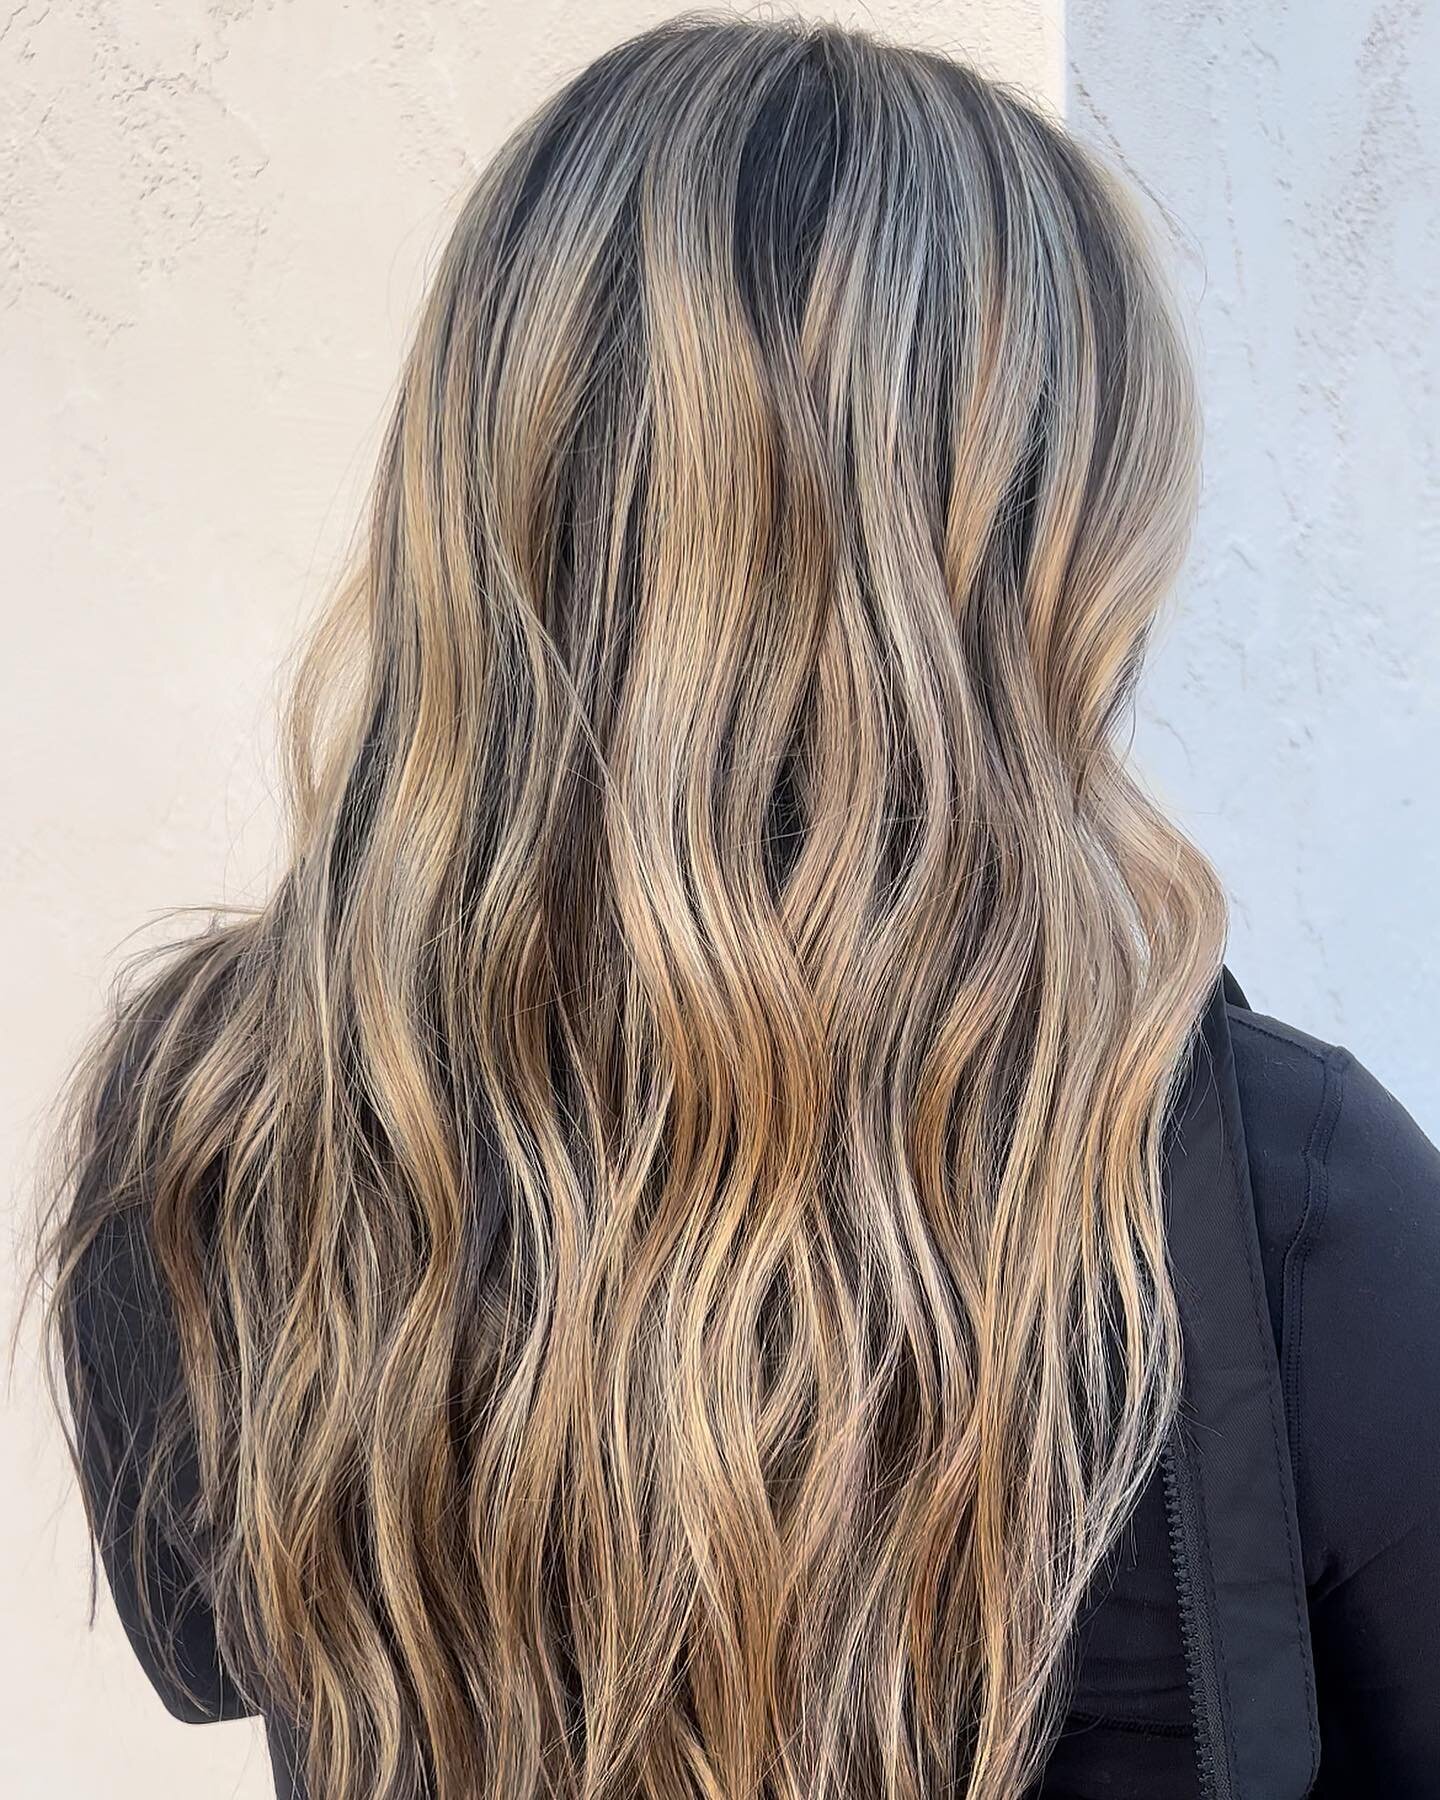 Let&rsquo;s add some dimension! 
Partial balayage for a dimensional beachy blonde✨

Swipe for her before!

I love adding depth at the root with a balayage that is feathered very close to the root to ensure a beautiful grow-out! 

Warm weather is here